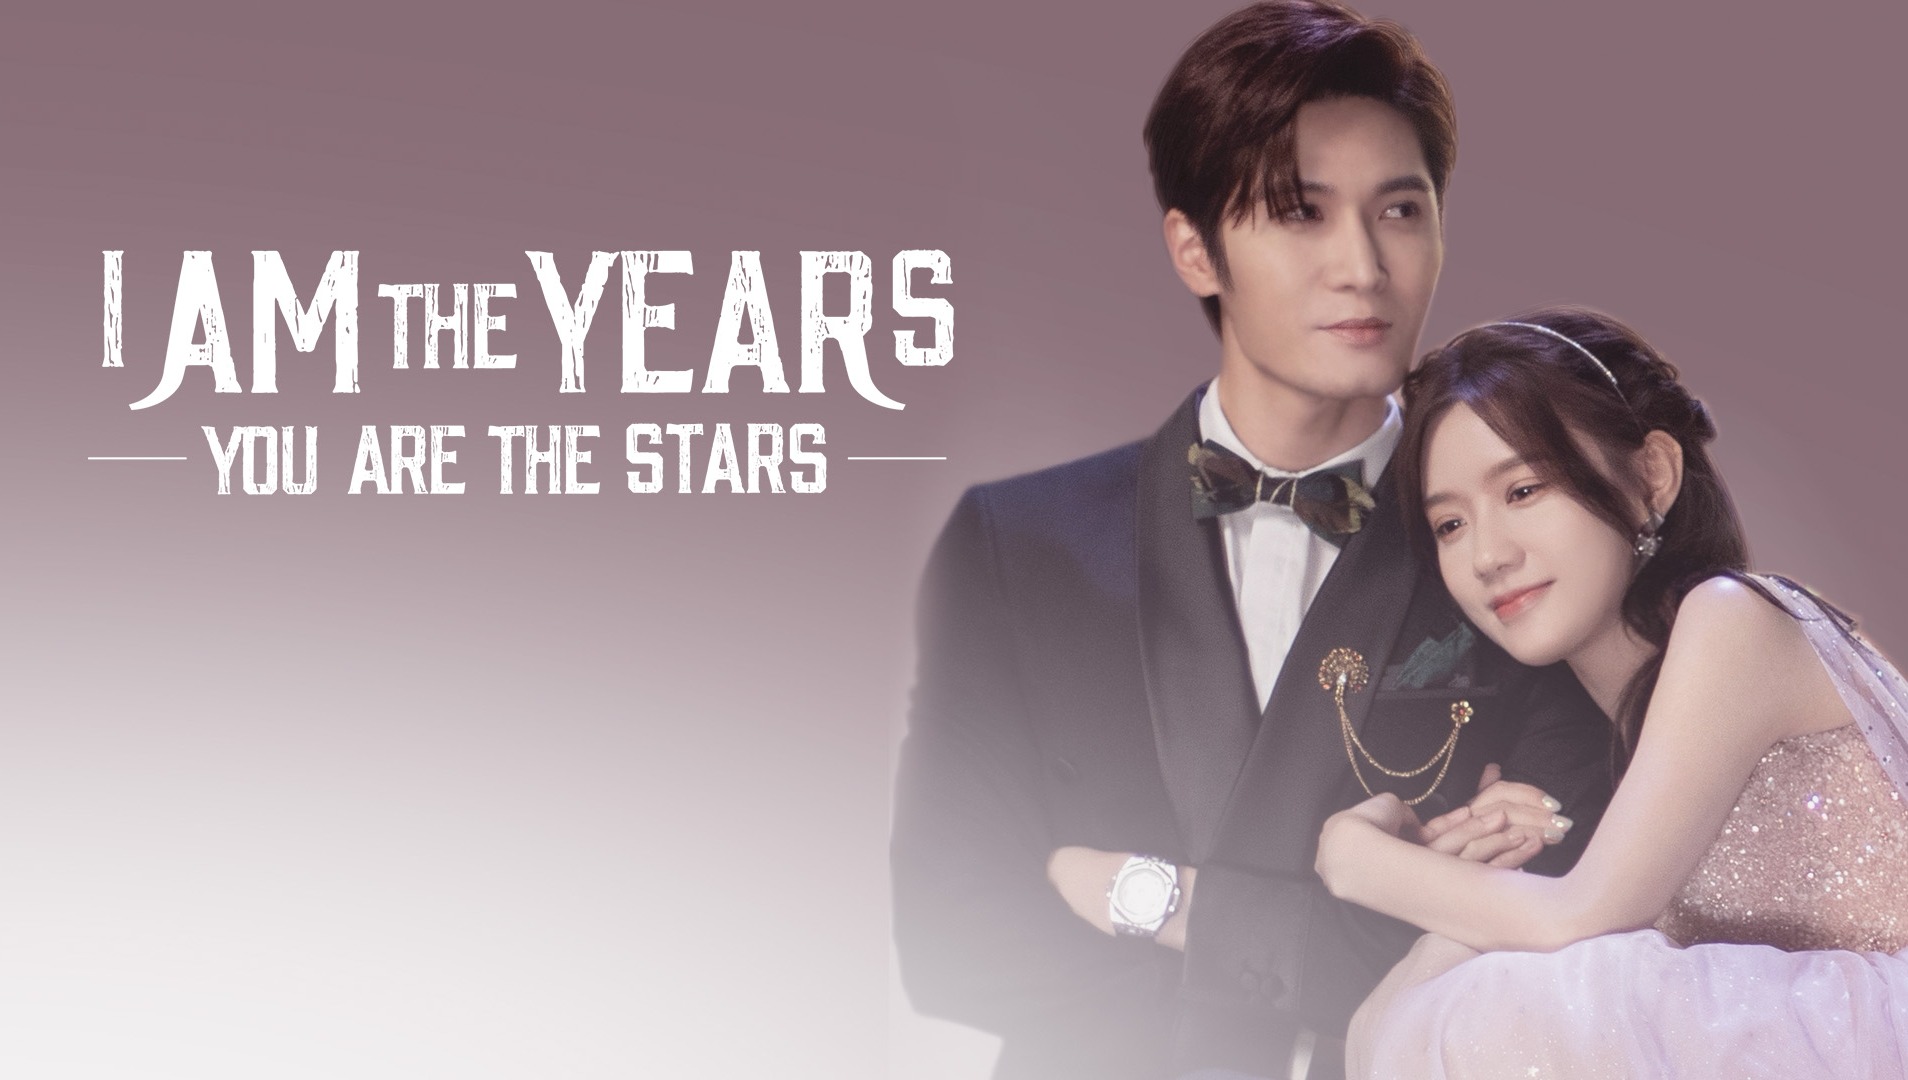 Stars i years the are am you the Chinese Drama: